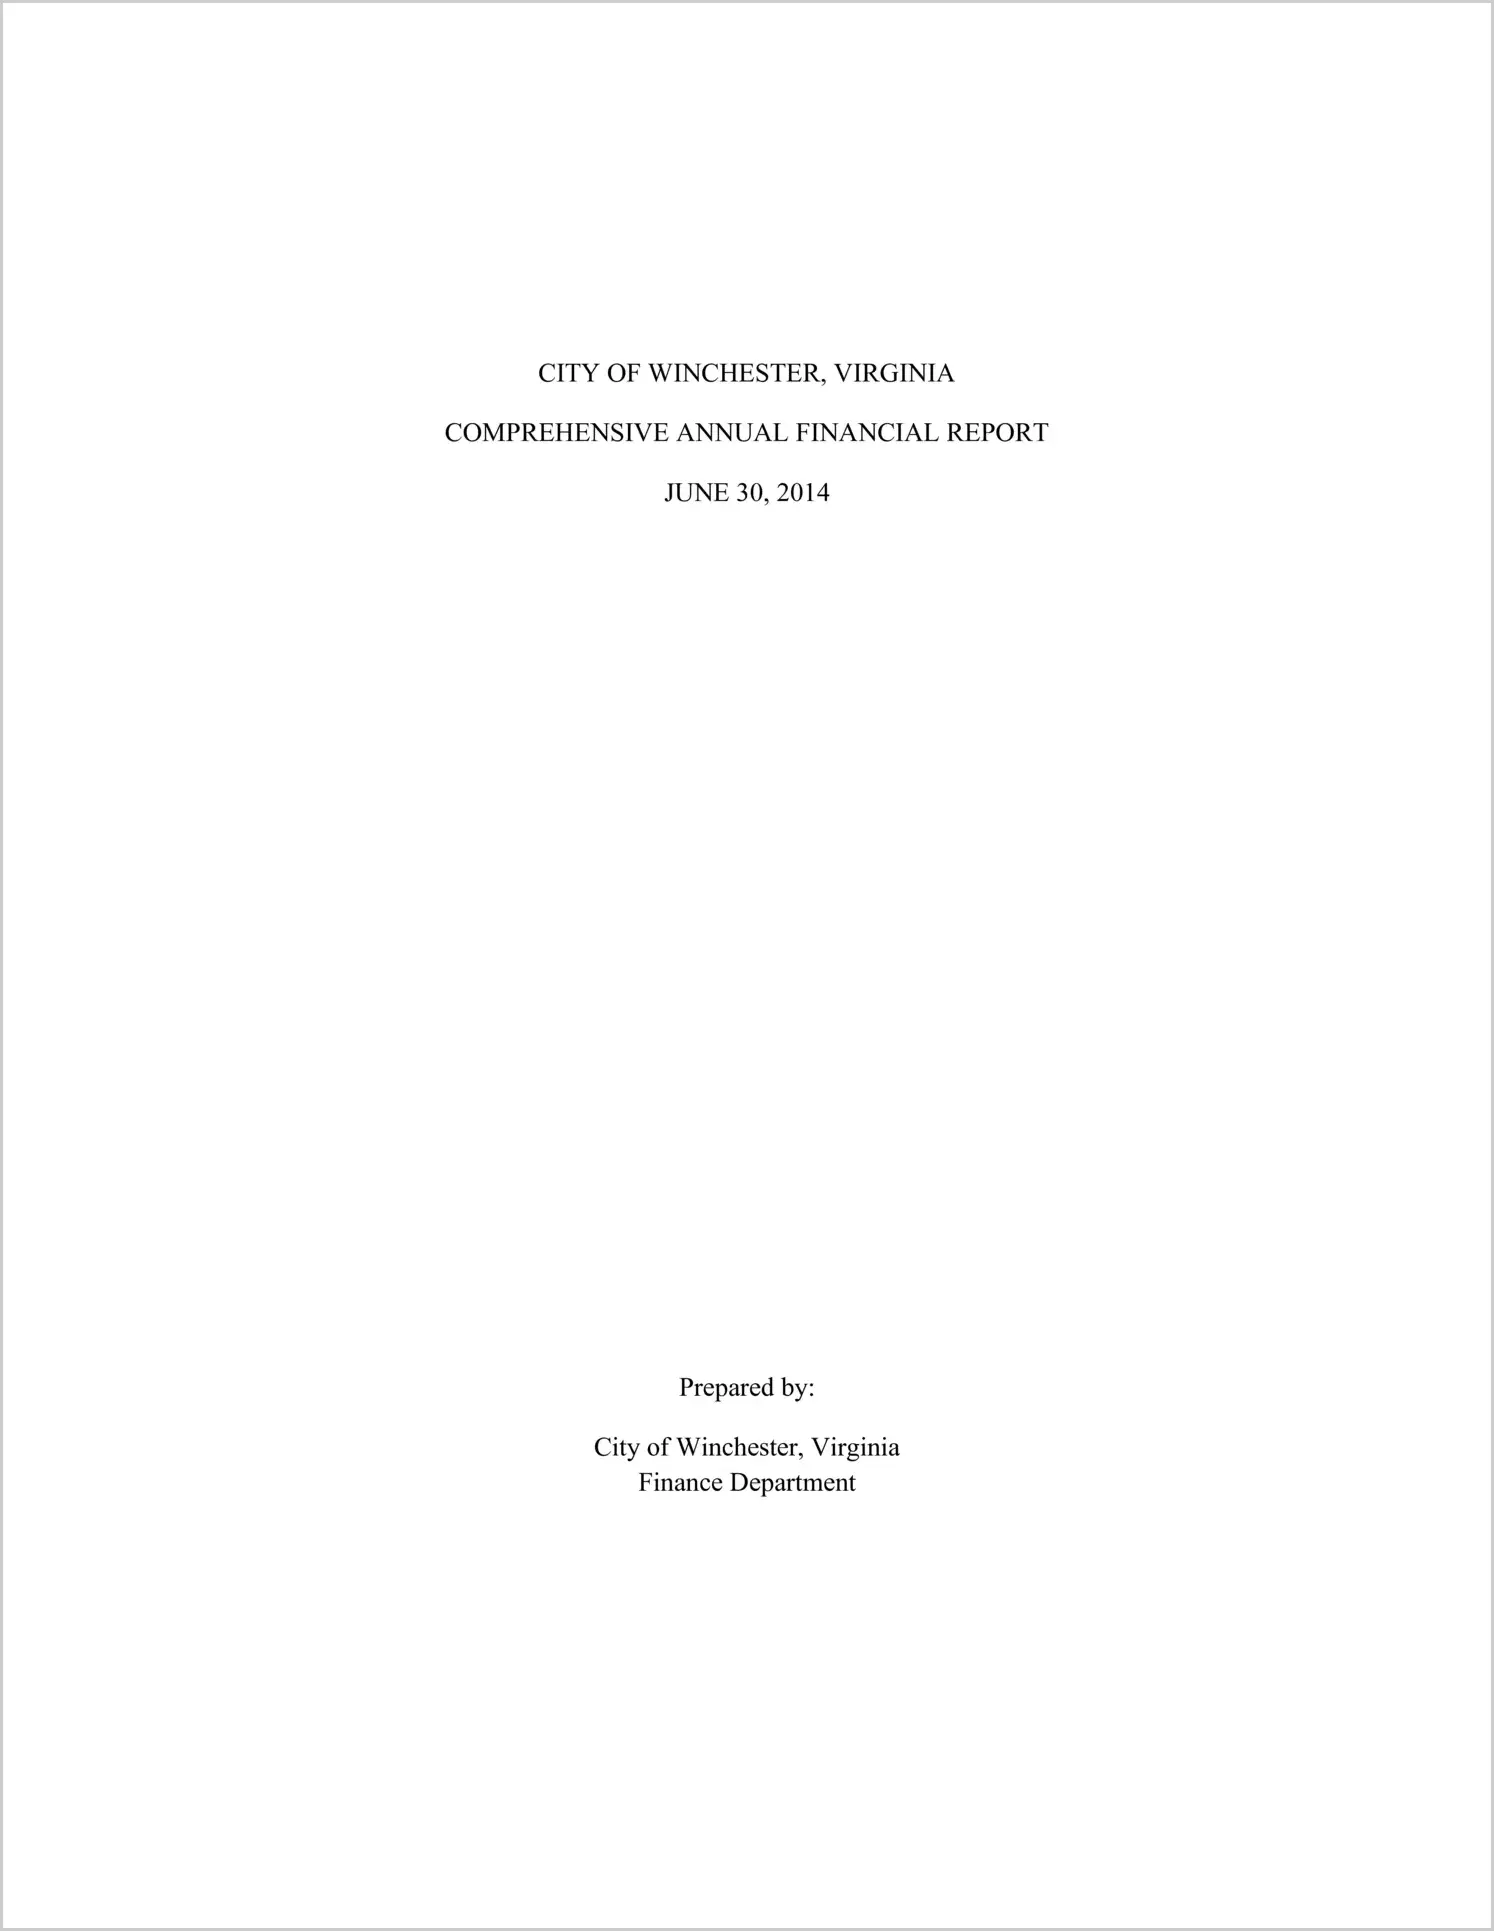 2014 Annual Financial Report for City of Winchester